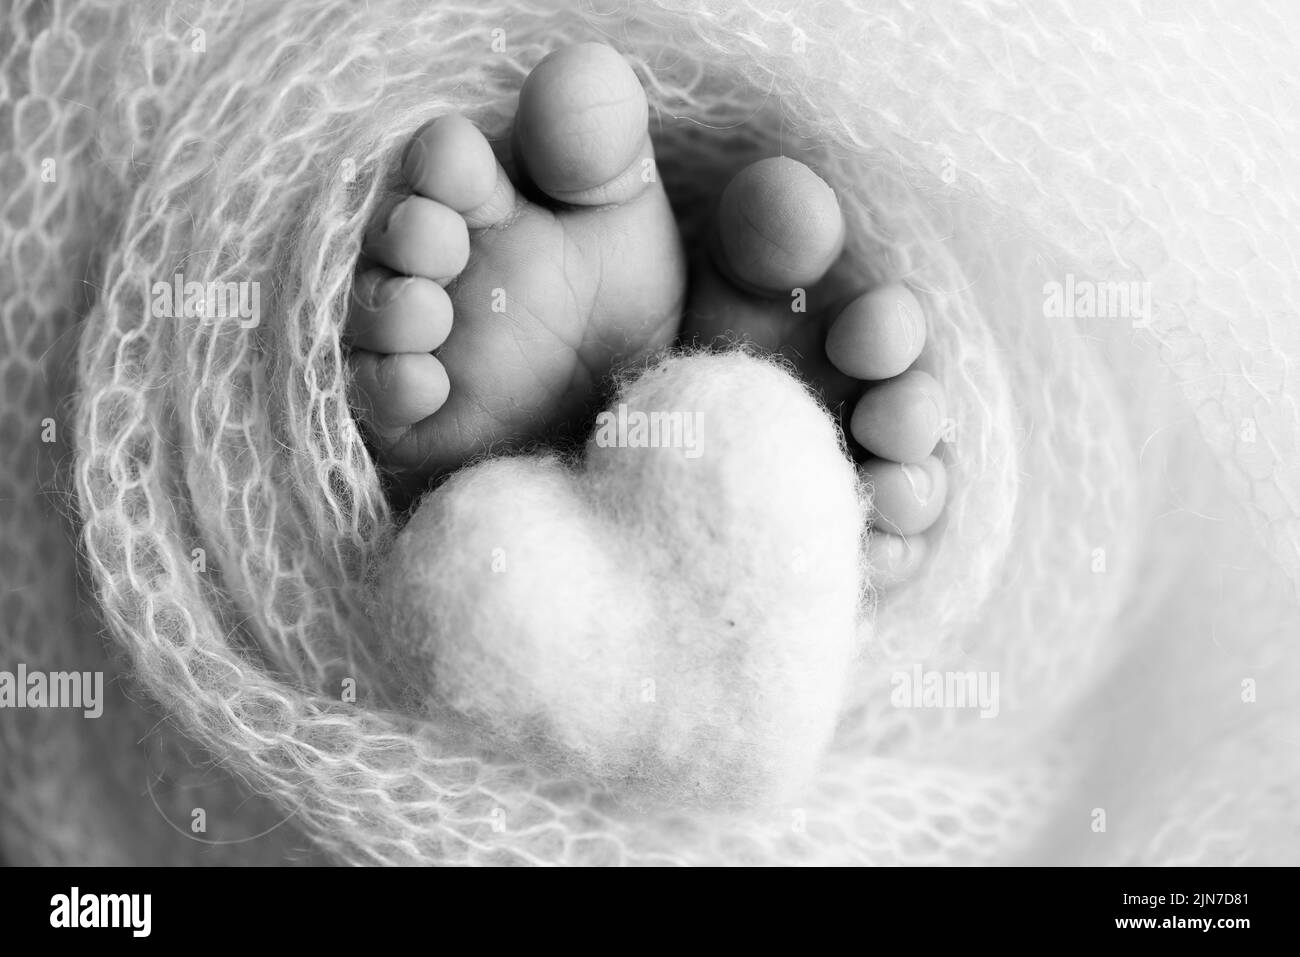 The tiny foot of a newborn baby. Soft feet of a new born in a wool blanket.  Stock Photo